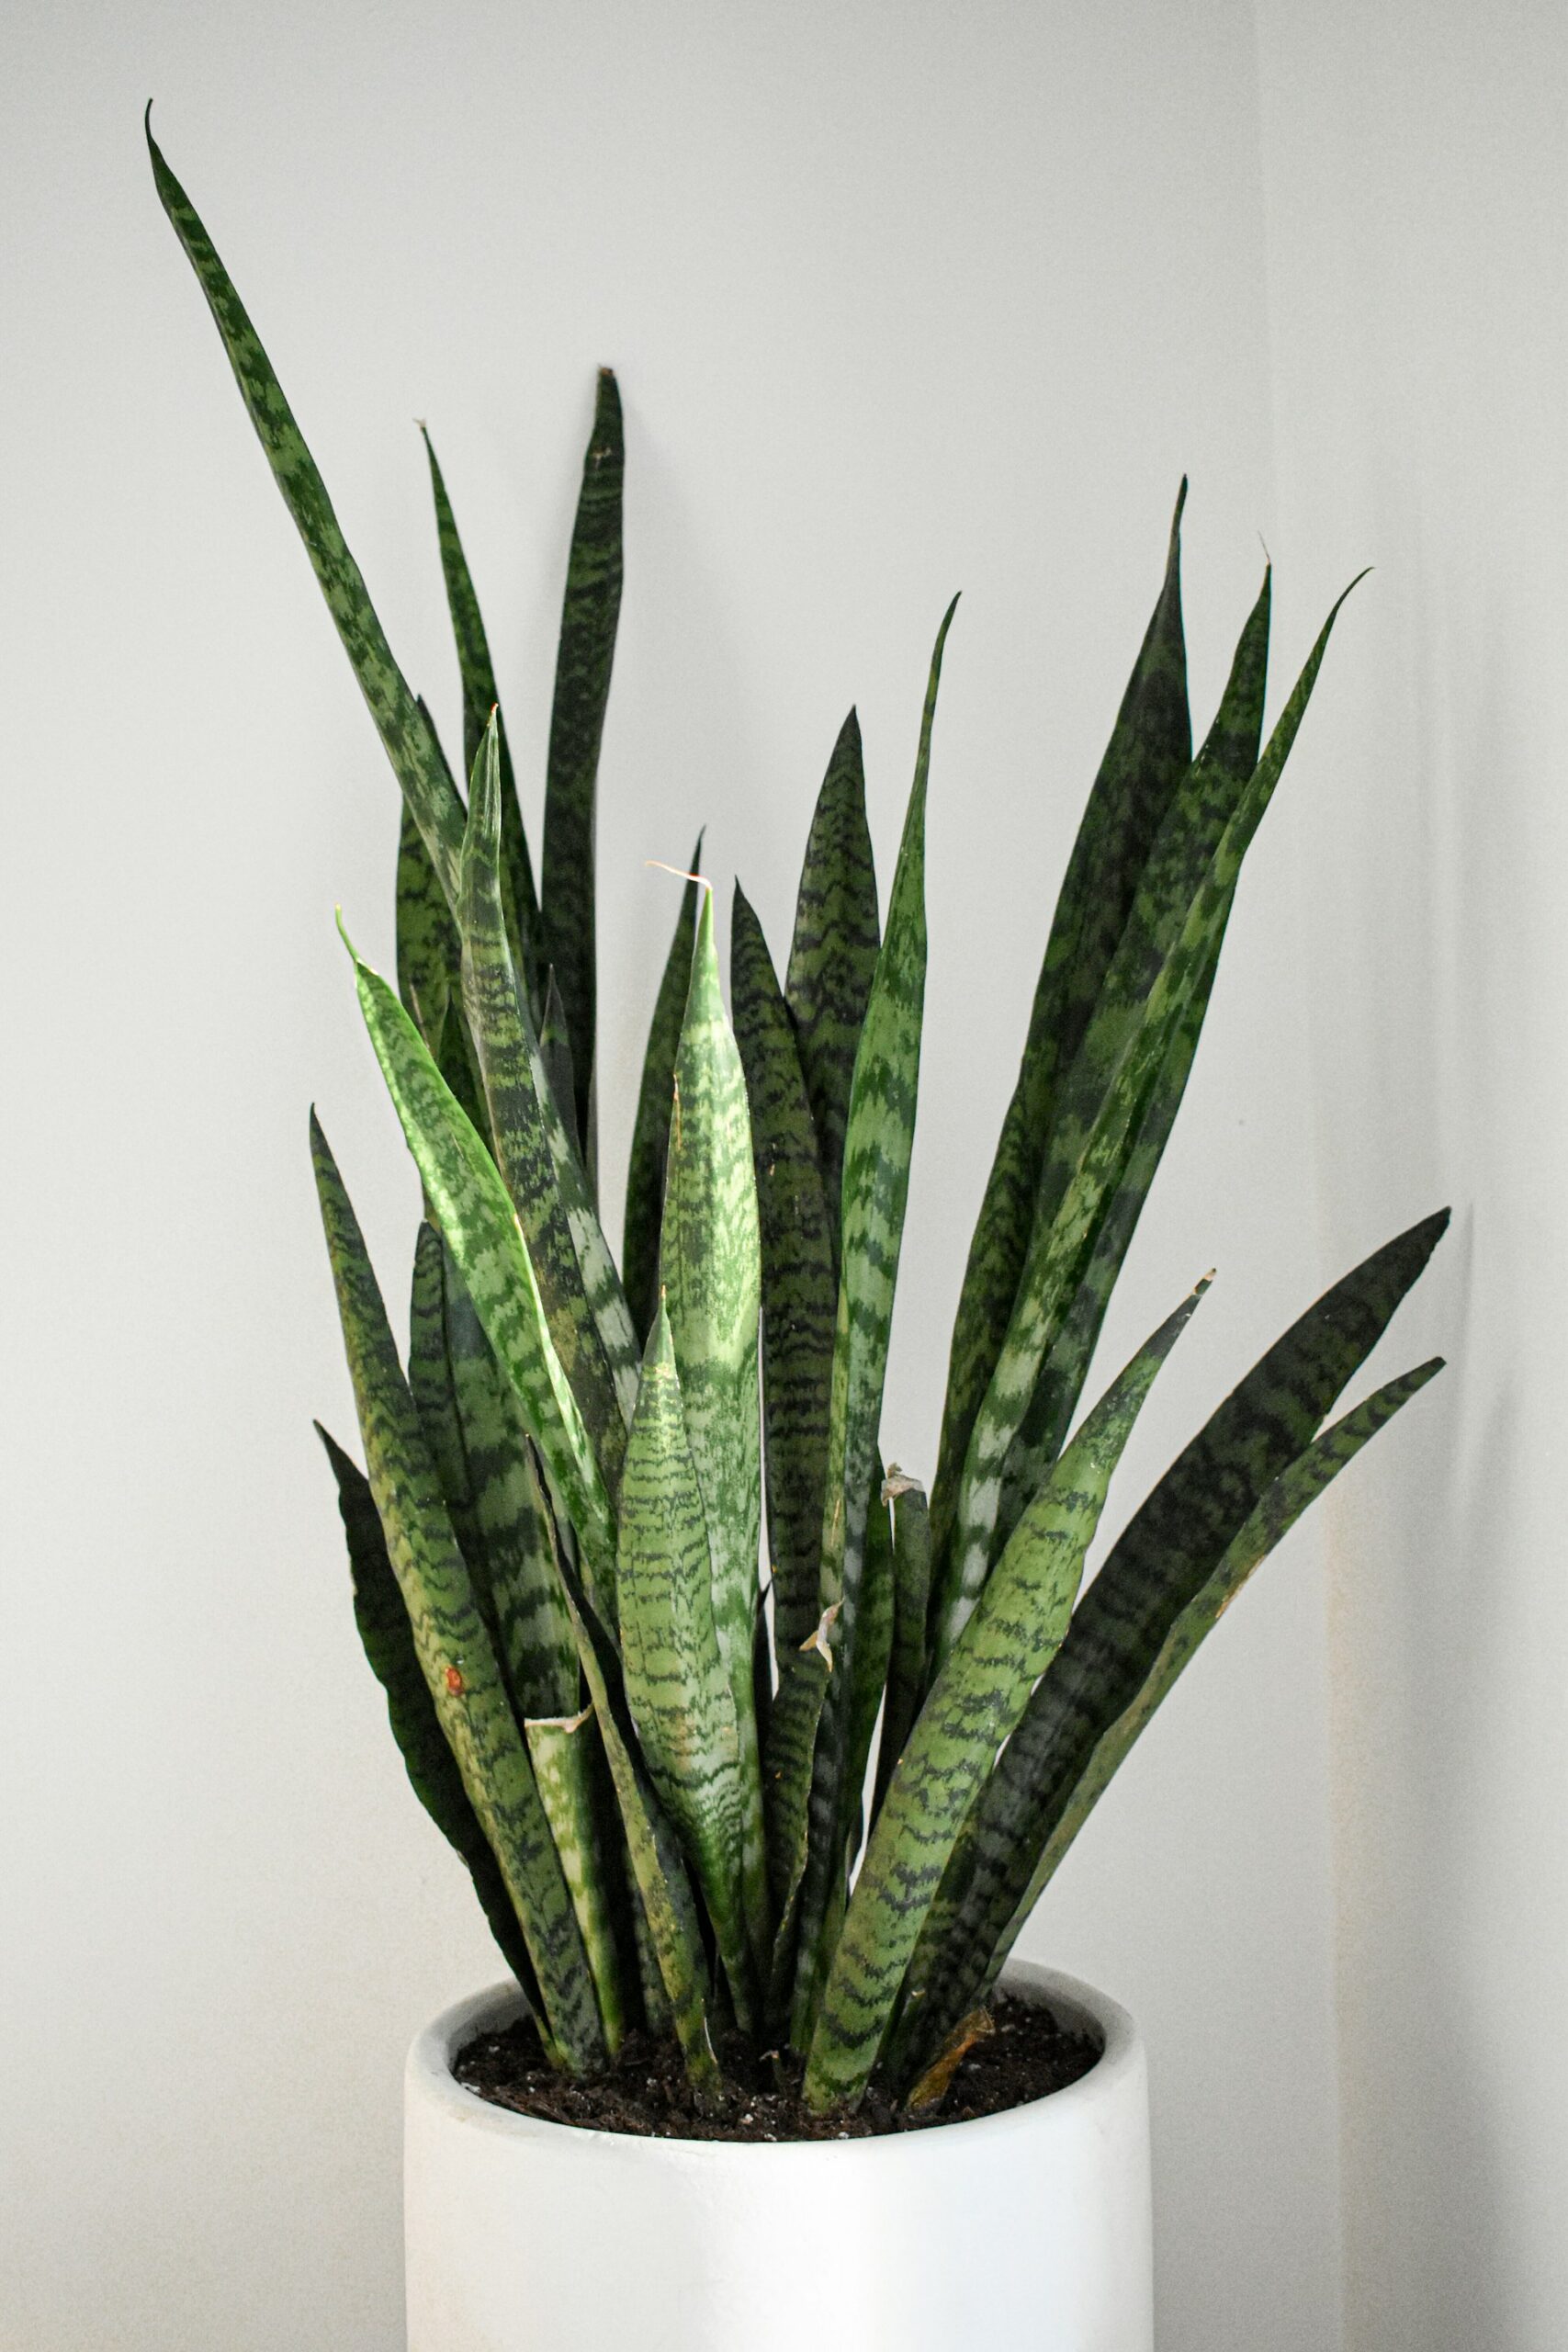 The Best Indoor Plants for Low Light and Small Spaces